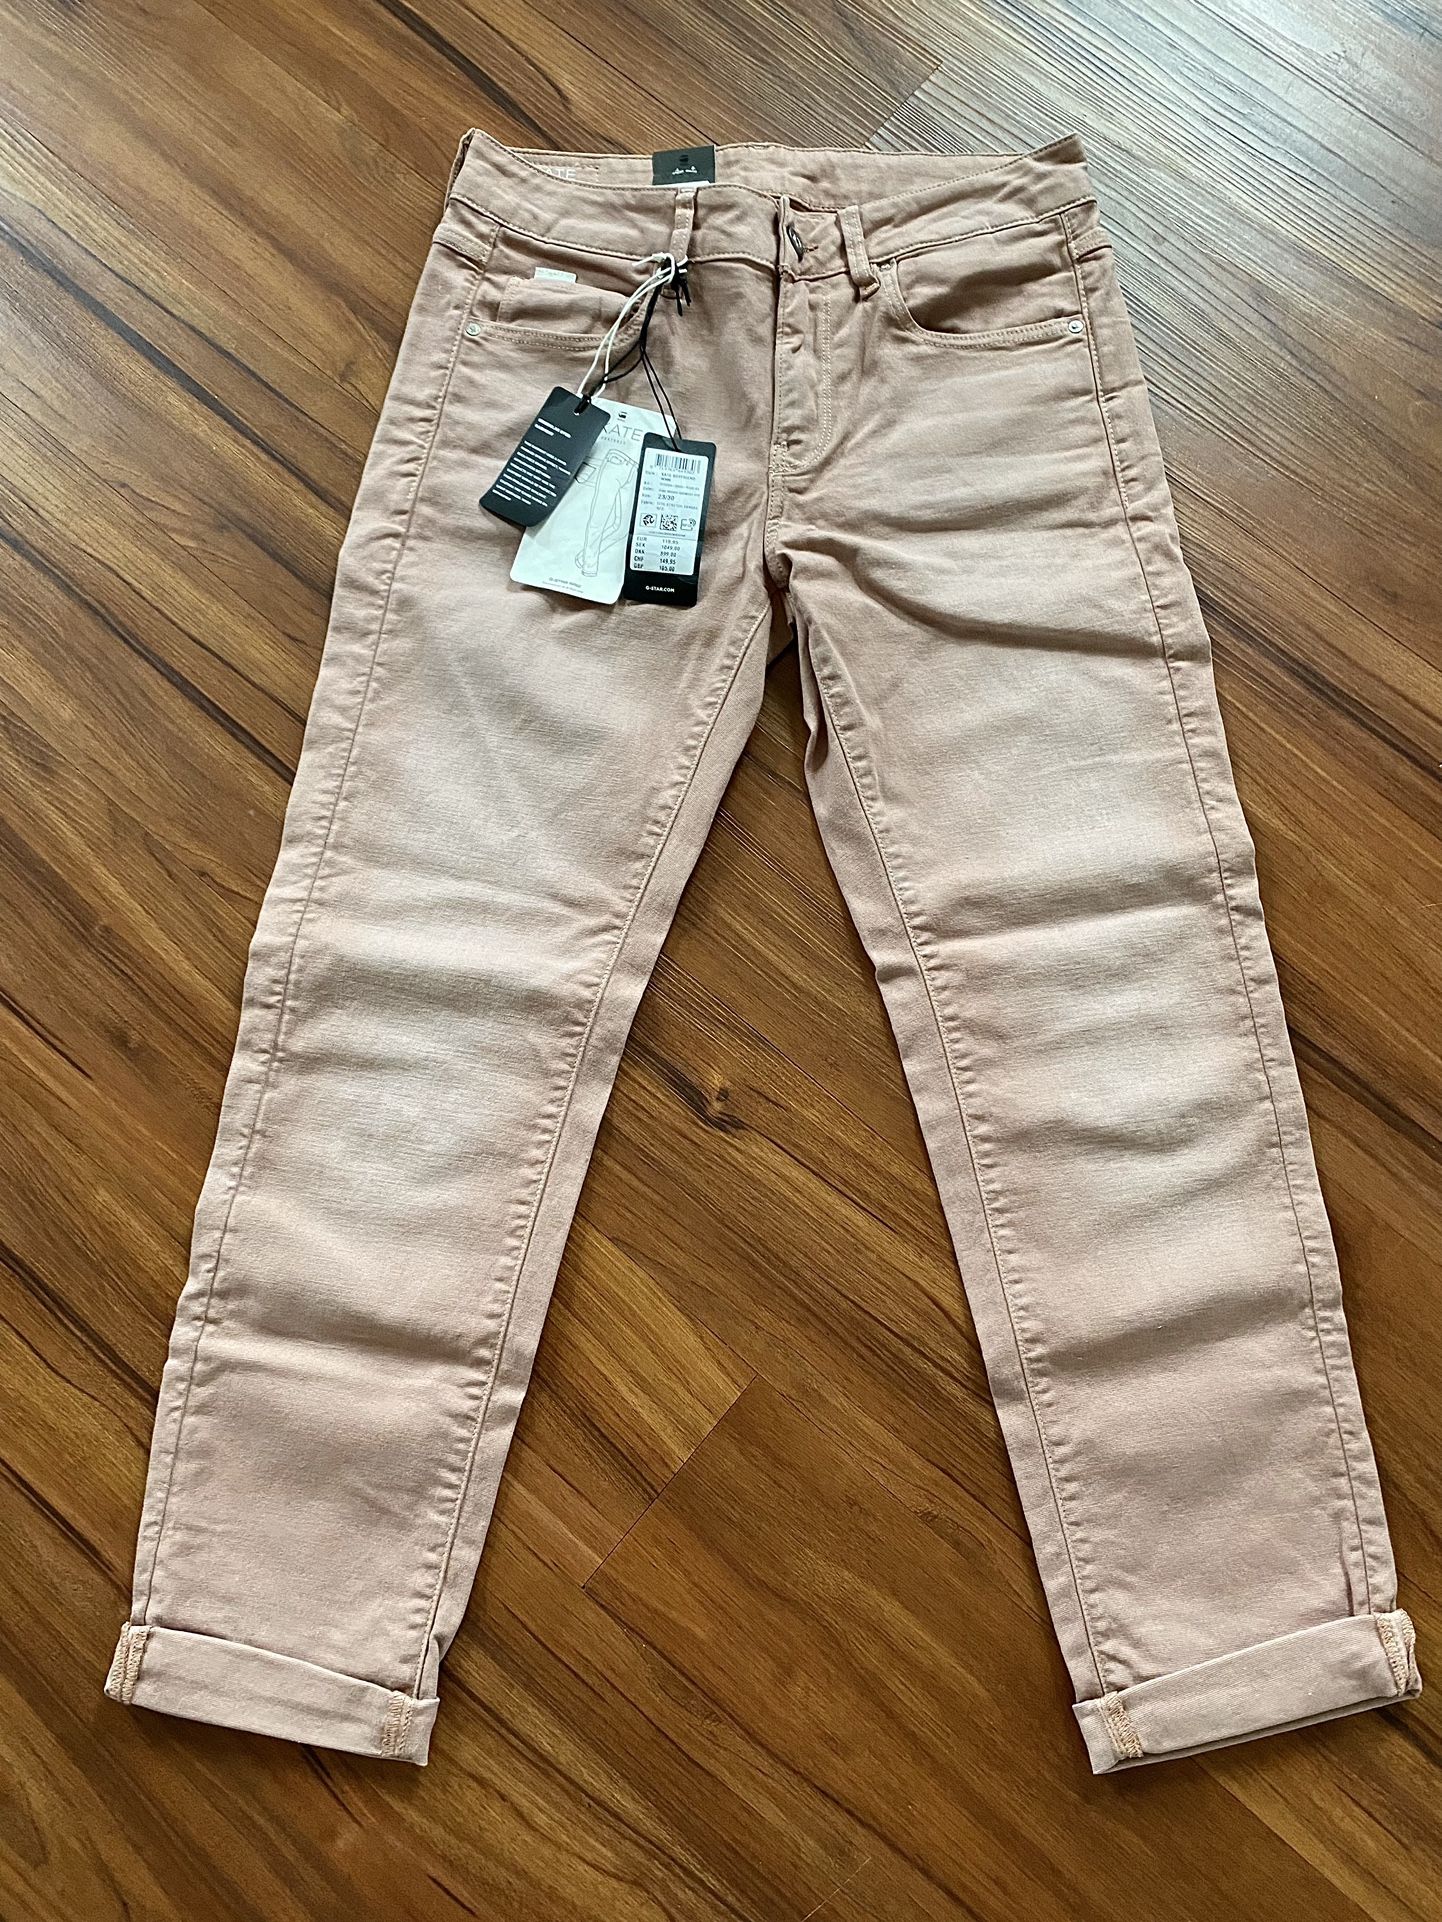 New With Tags G-Star RAW Kate Rolled Cuff Boyfriend Jeans Size 23/30 NWT in Pink Orchid